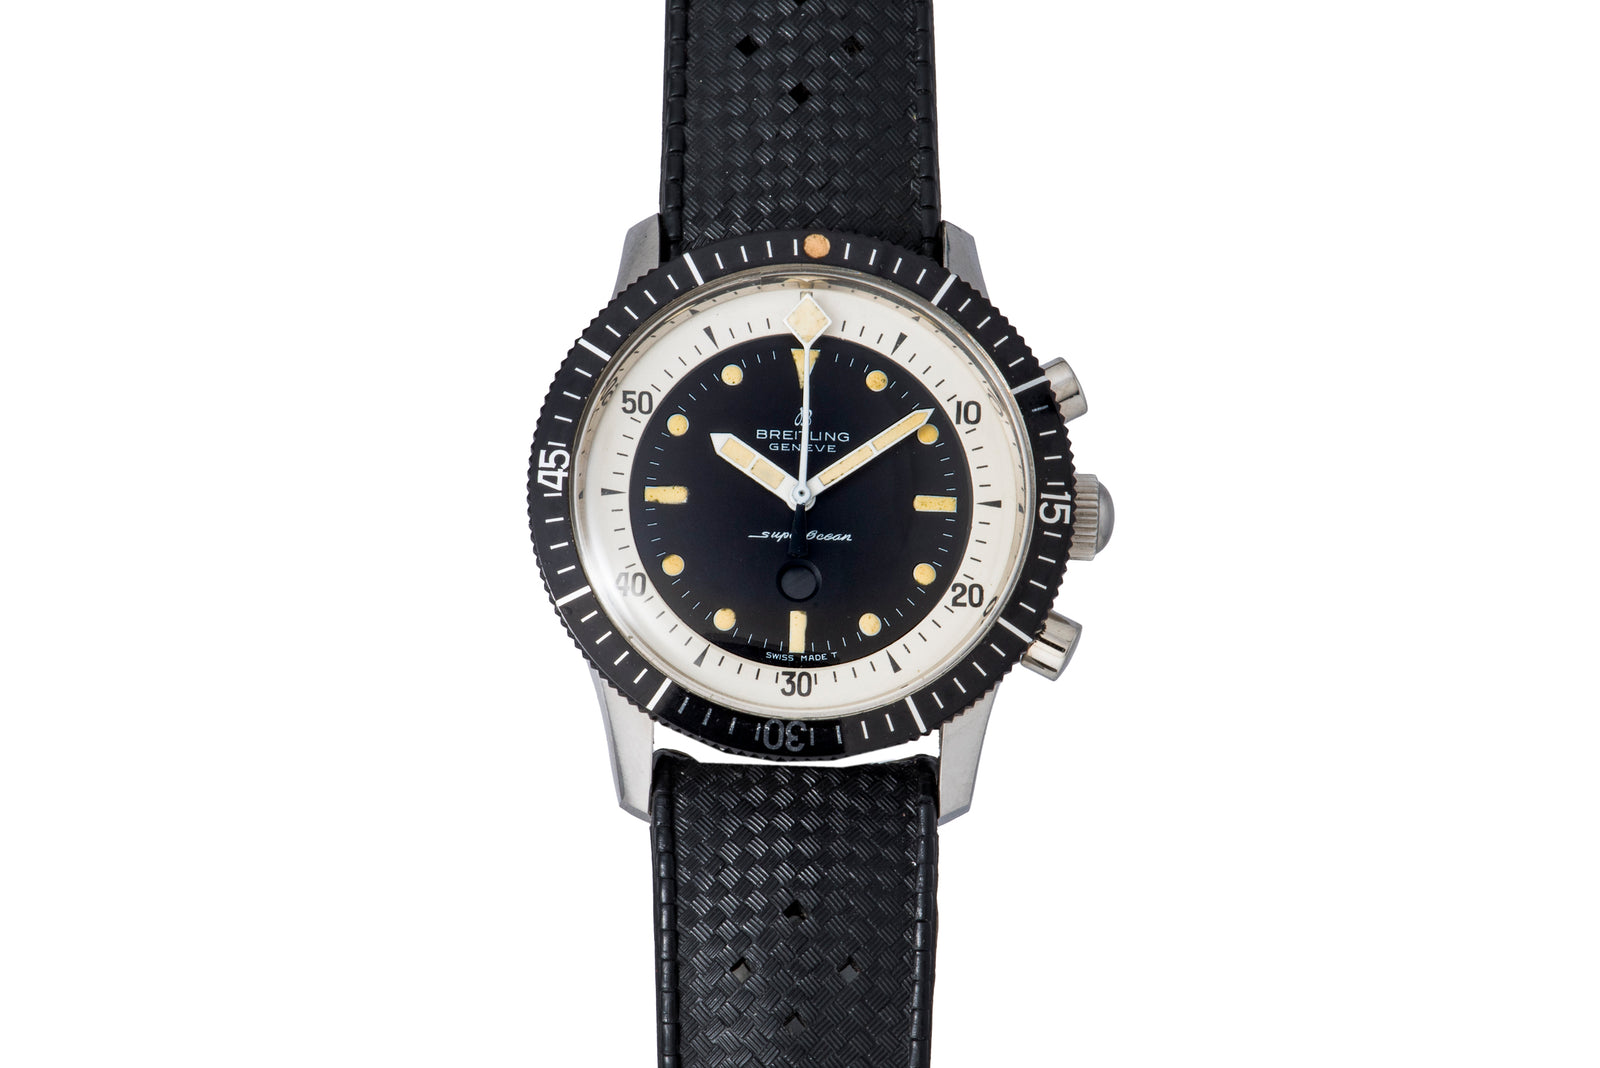 Breitling Superocean 'Slow Counting' Chronograph